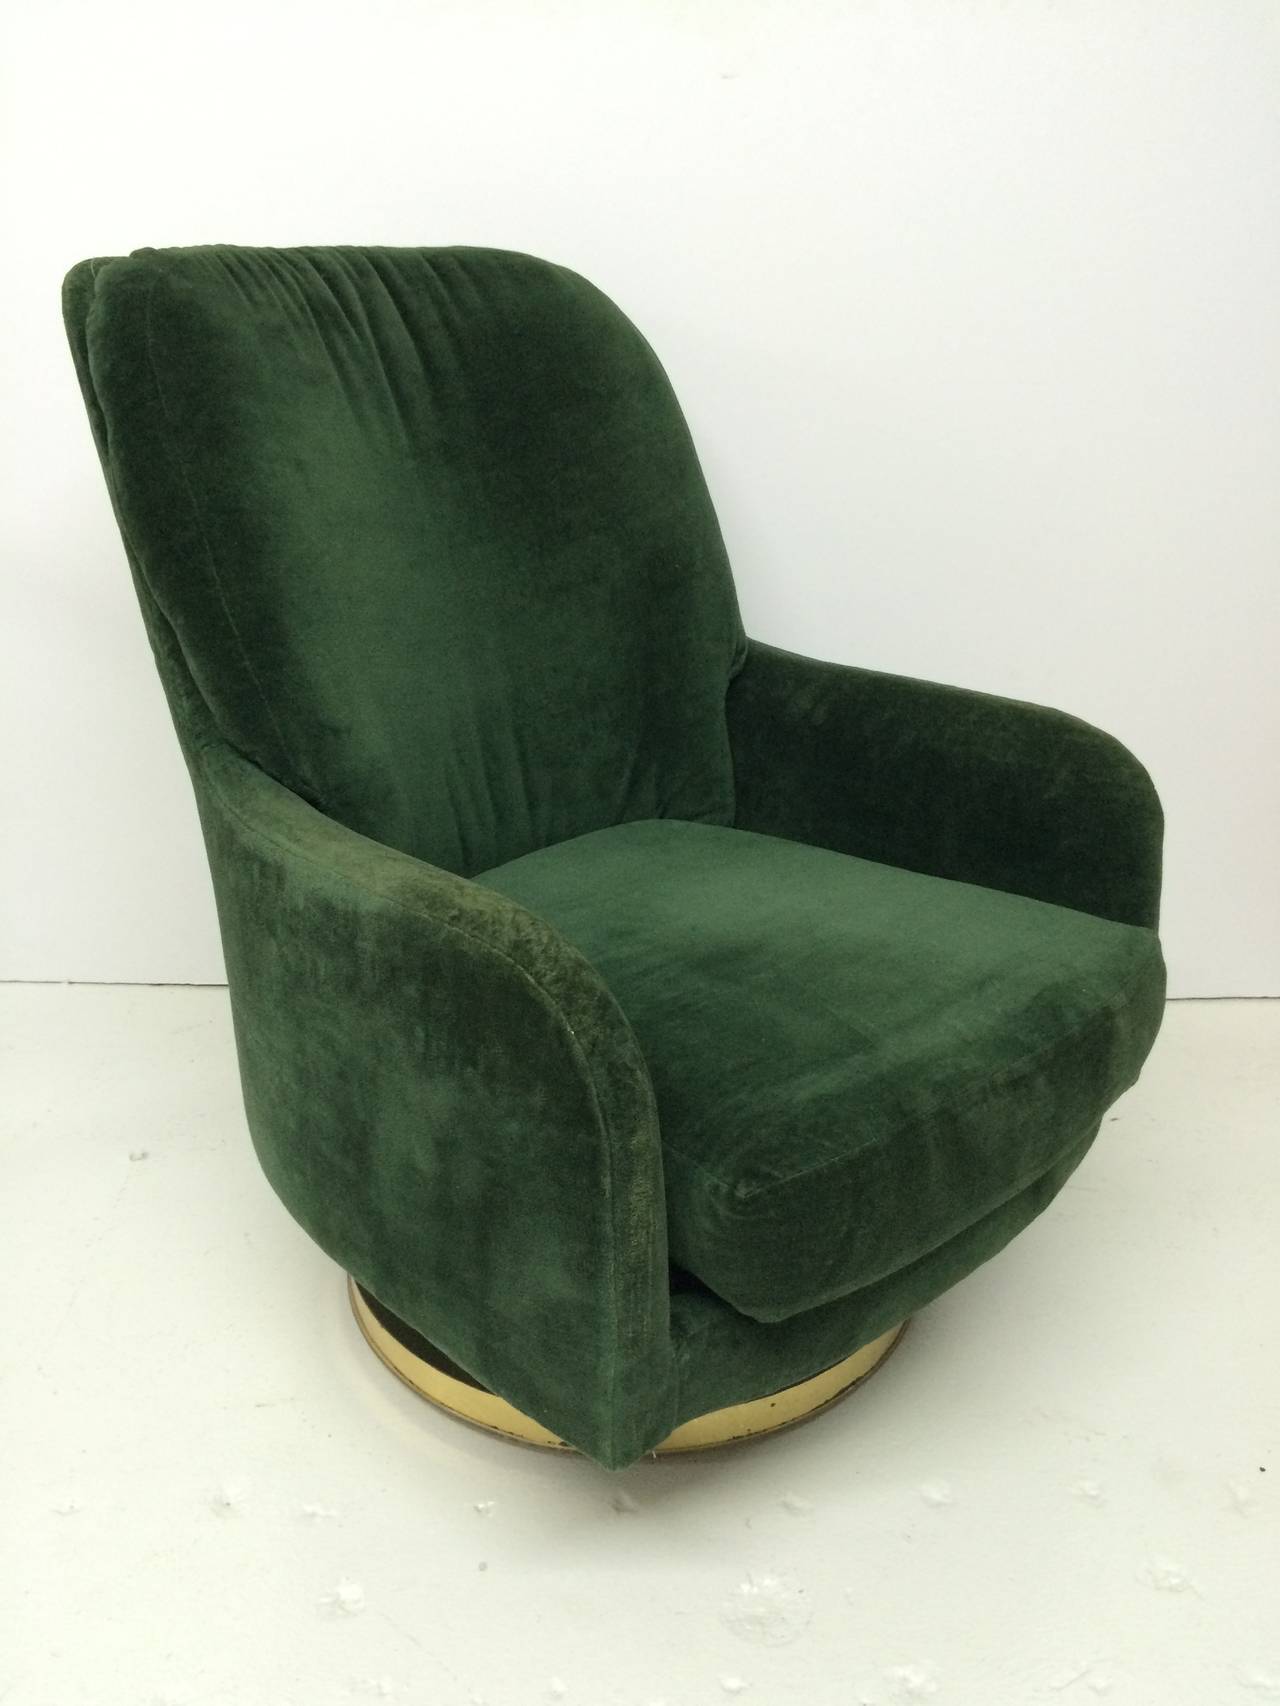 Swivel lounge chair with original green velvet fabric and round brass base by Milo Baughman for Thayer Coggin.